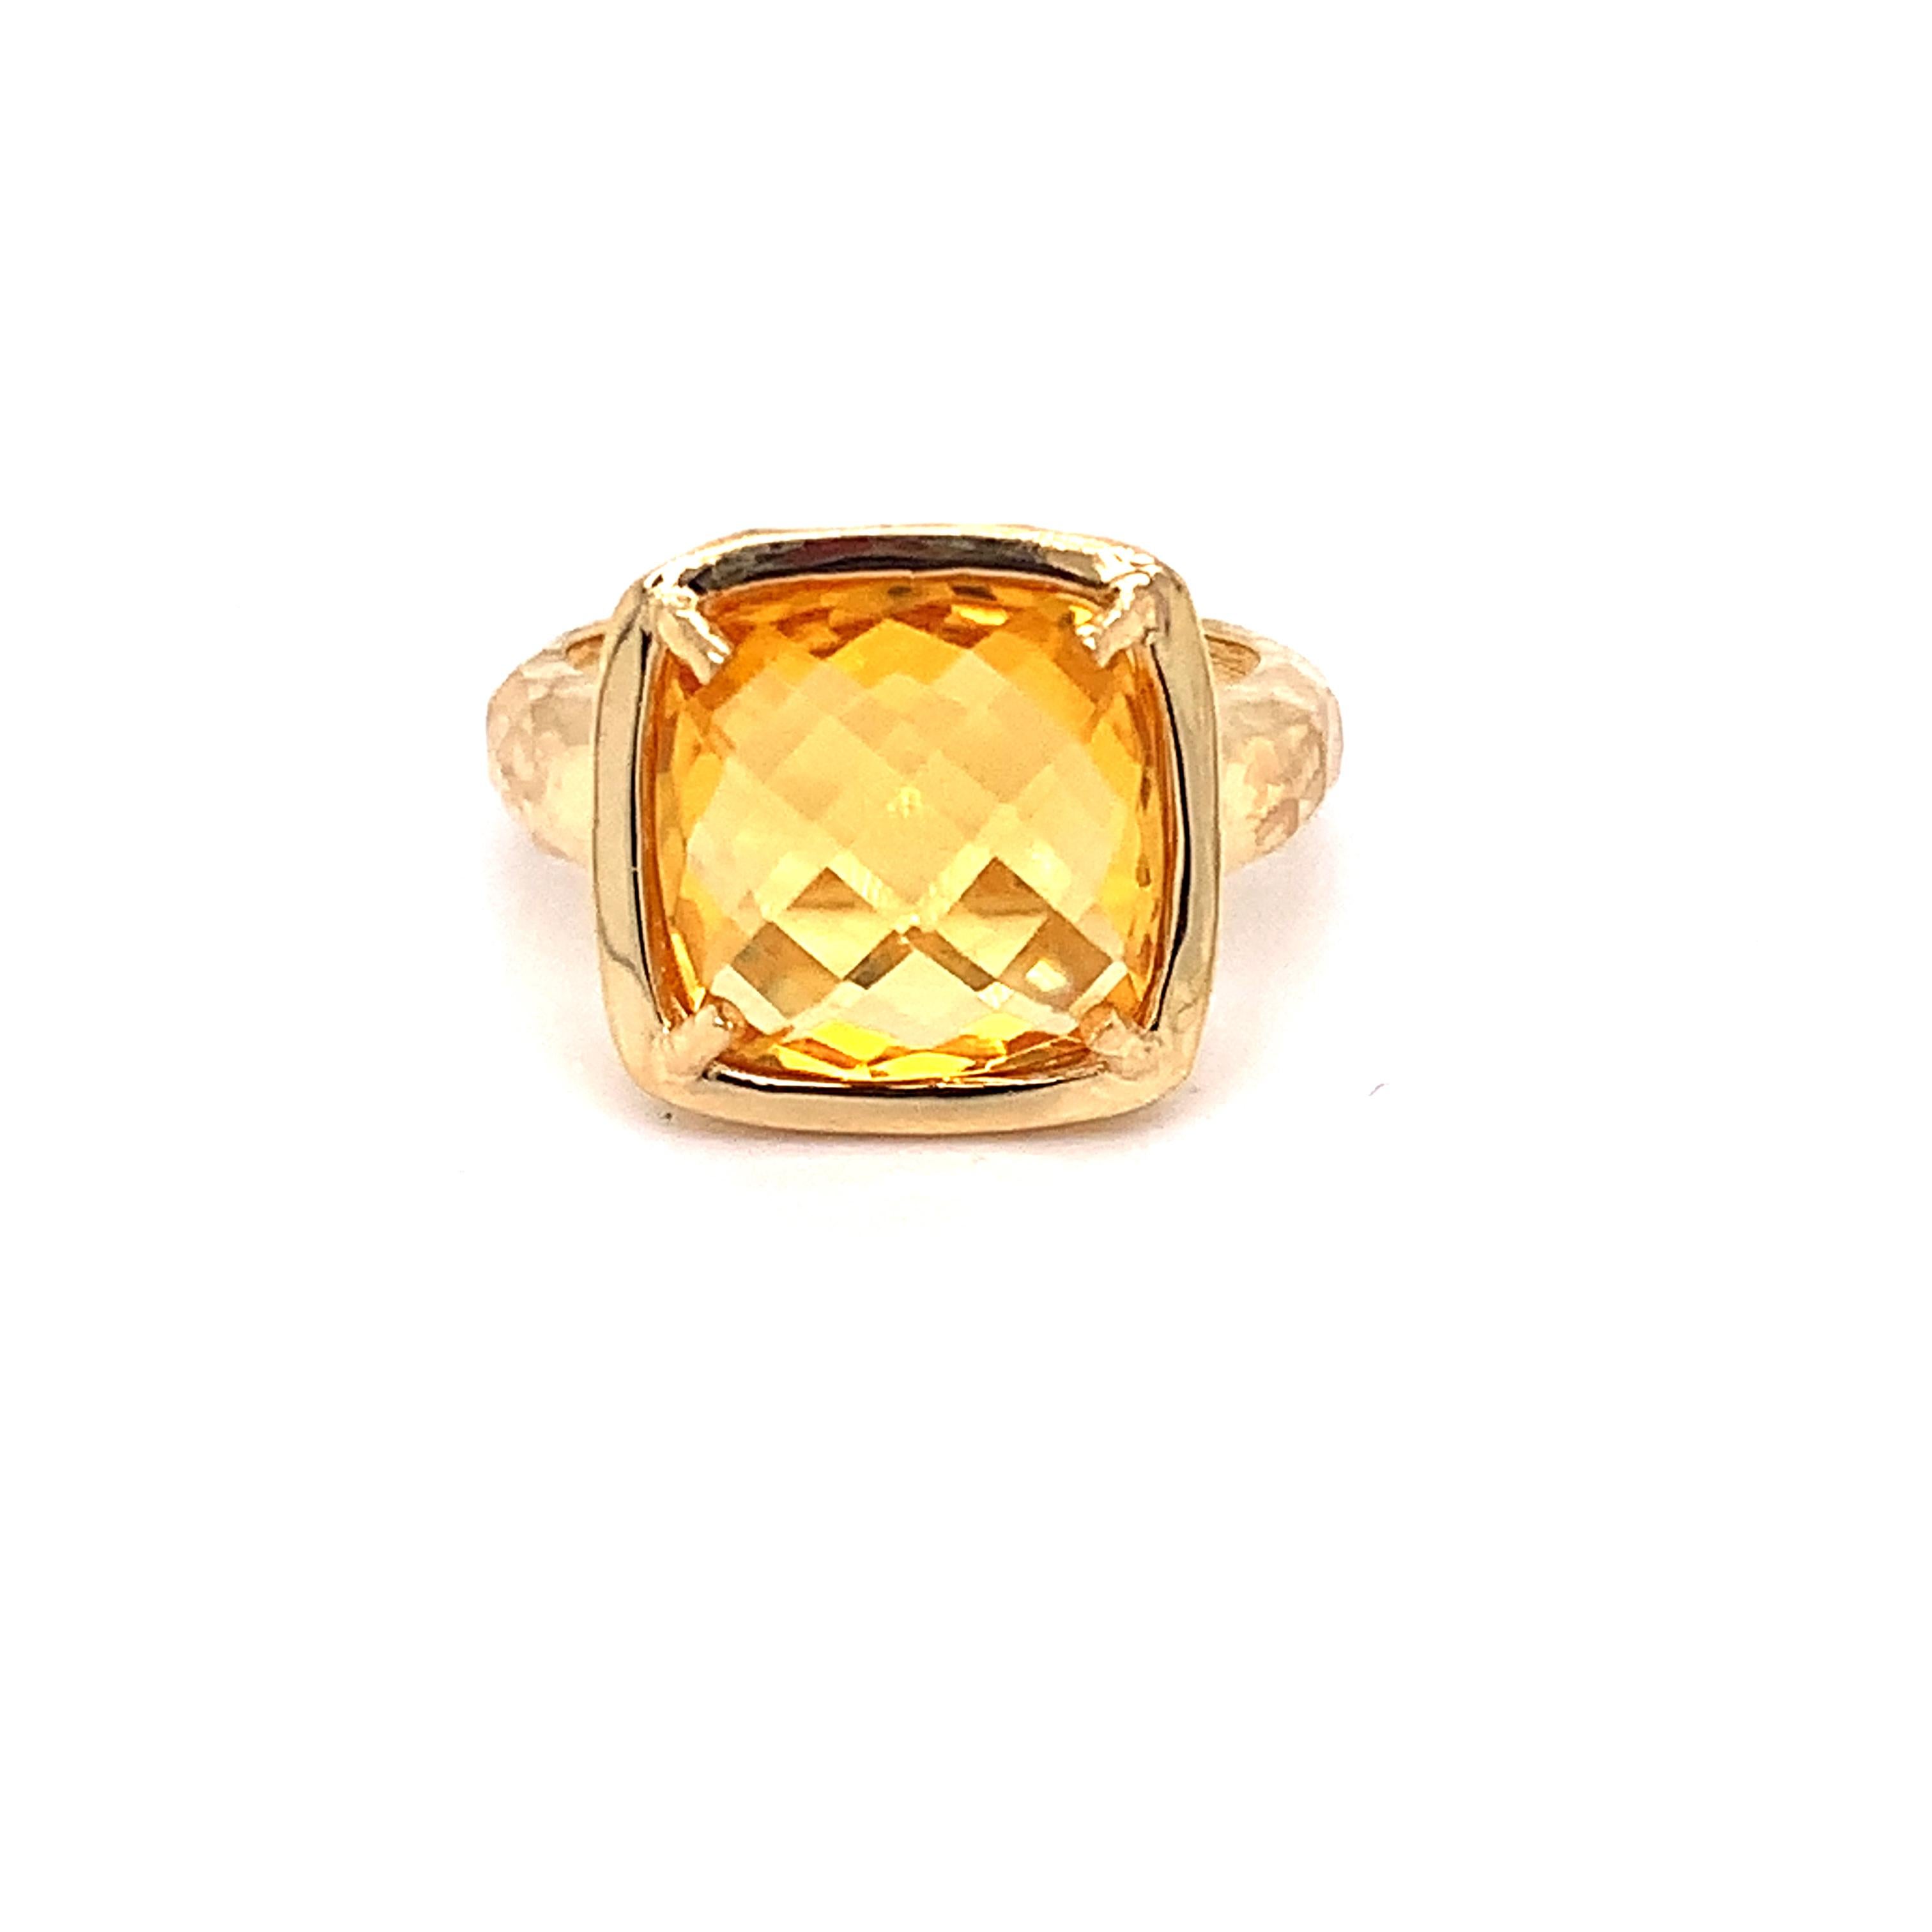 For Sale:  Hand-Crafted 14 Karat Yellow Gold Citrine Cocktail Ring 2